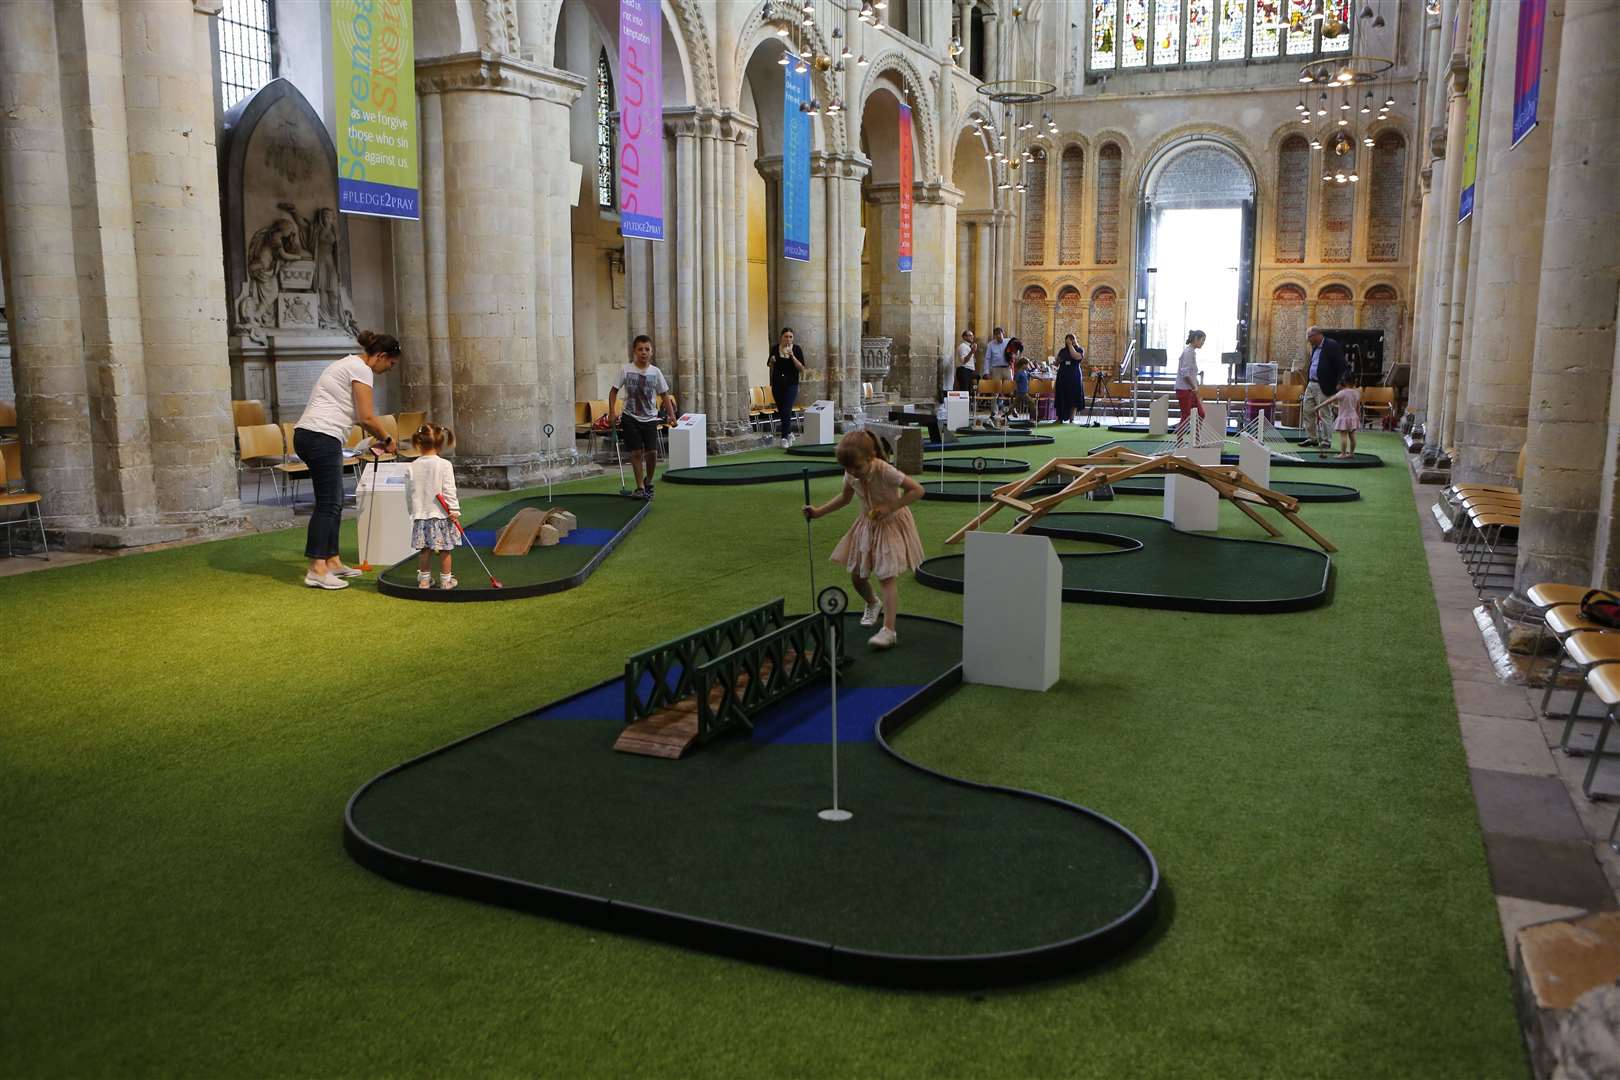 The golf course at the cathedral caused a stir